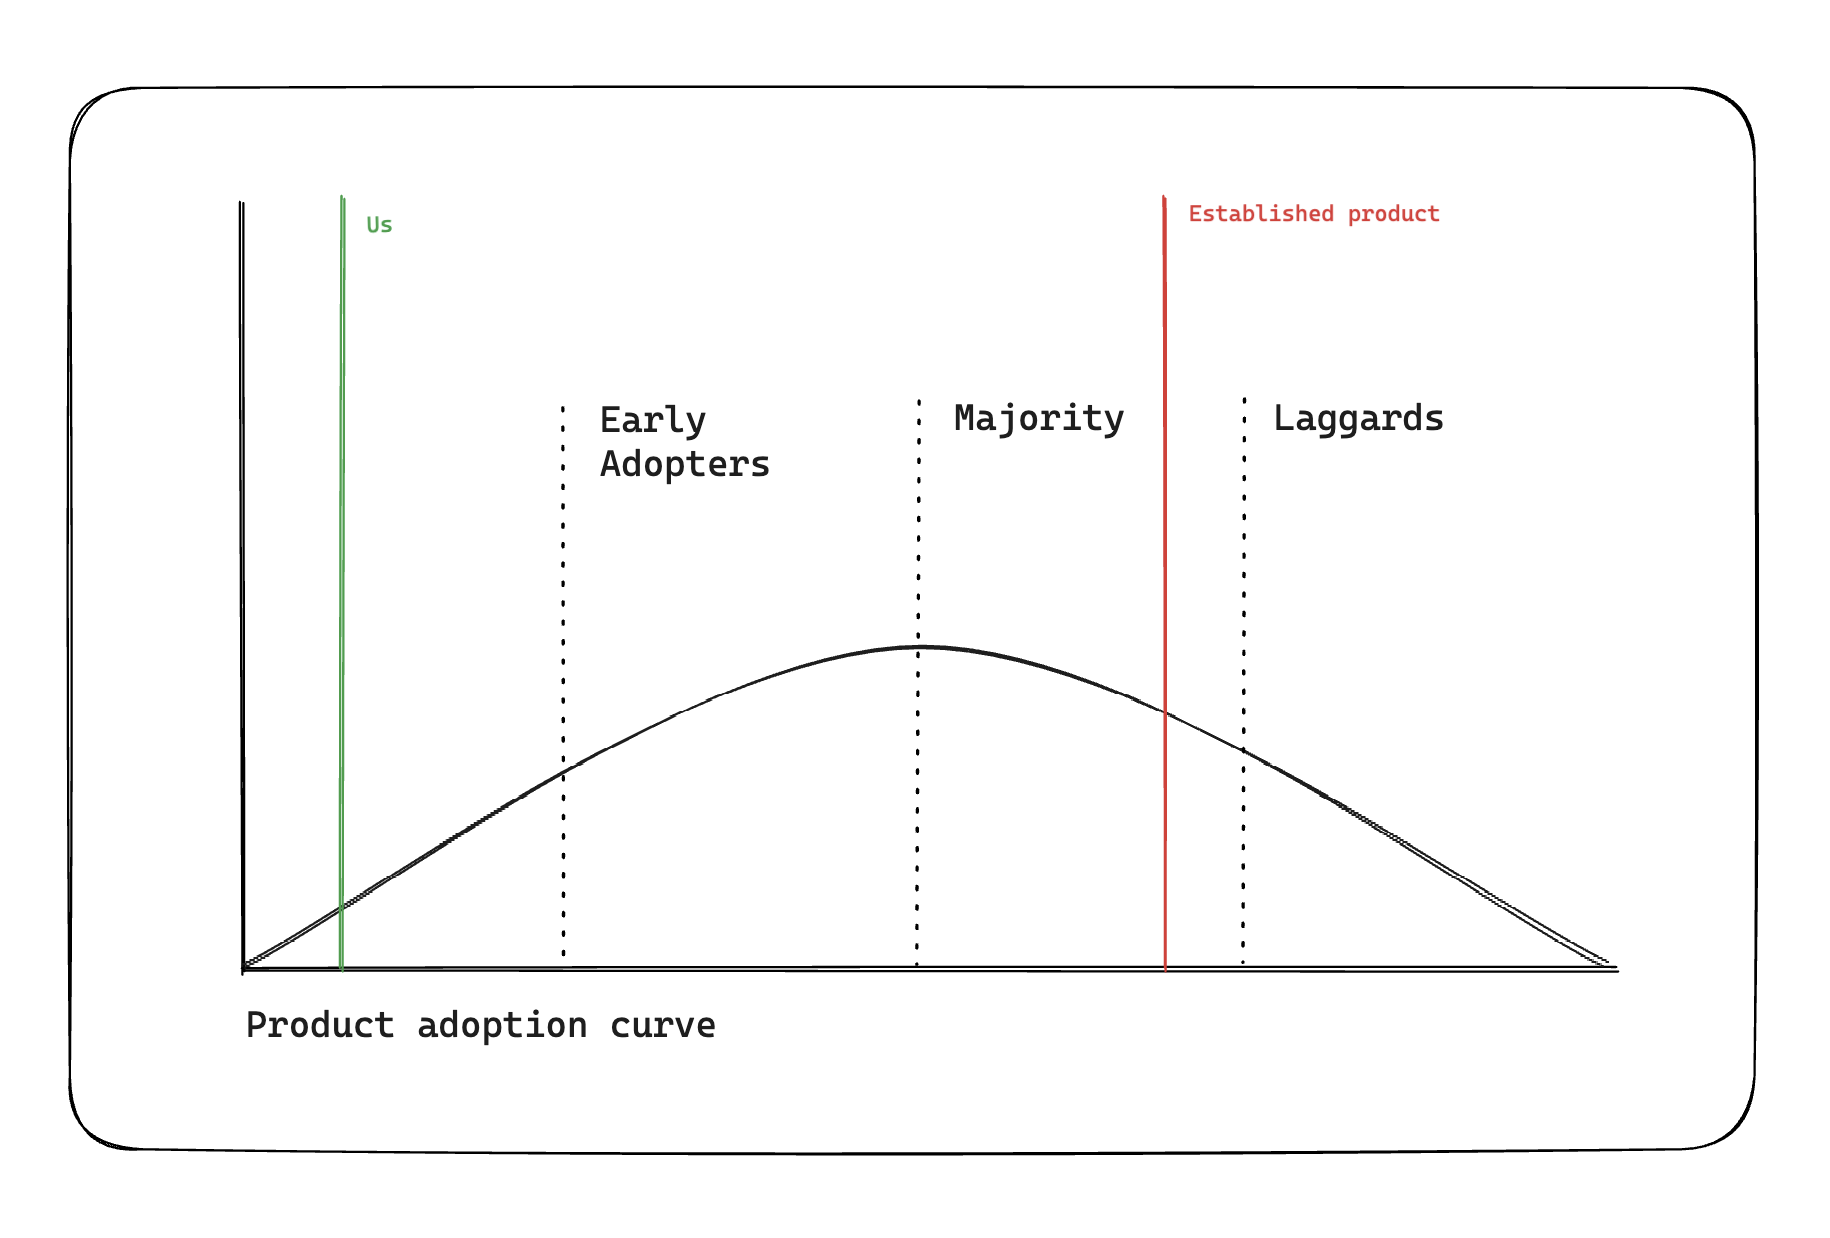 A graph showing the distribution of product users: (in order) early adopters, the majority, and laggards. Startup launches capture just the earliest of the early adopters. Established products, however, capture more of the majority and laggards.